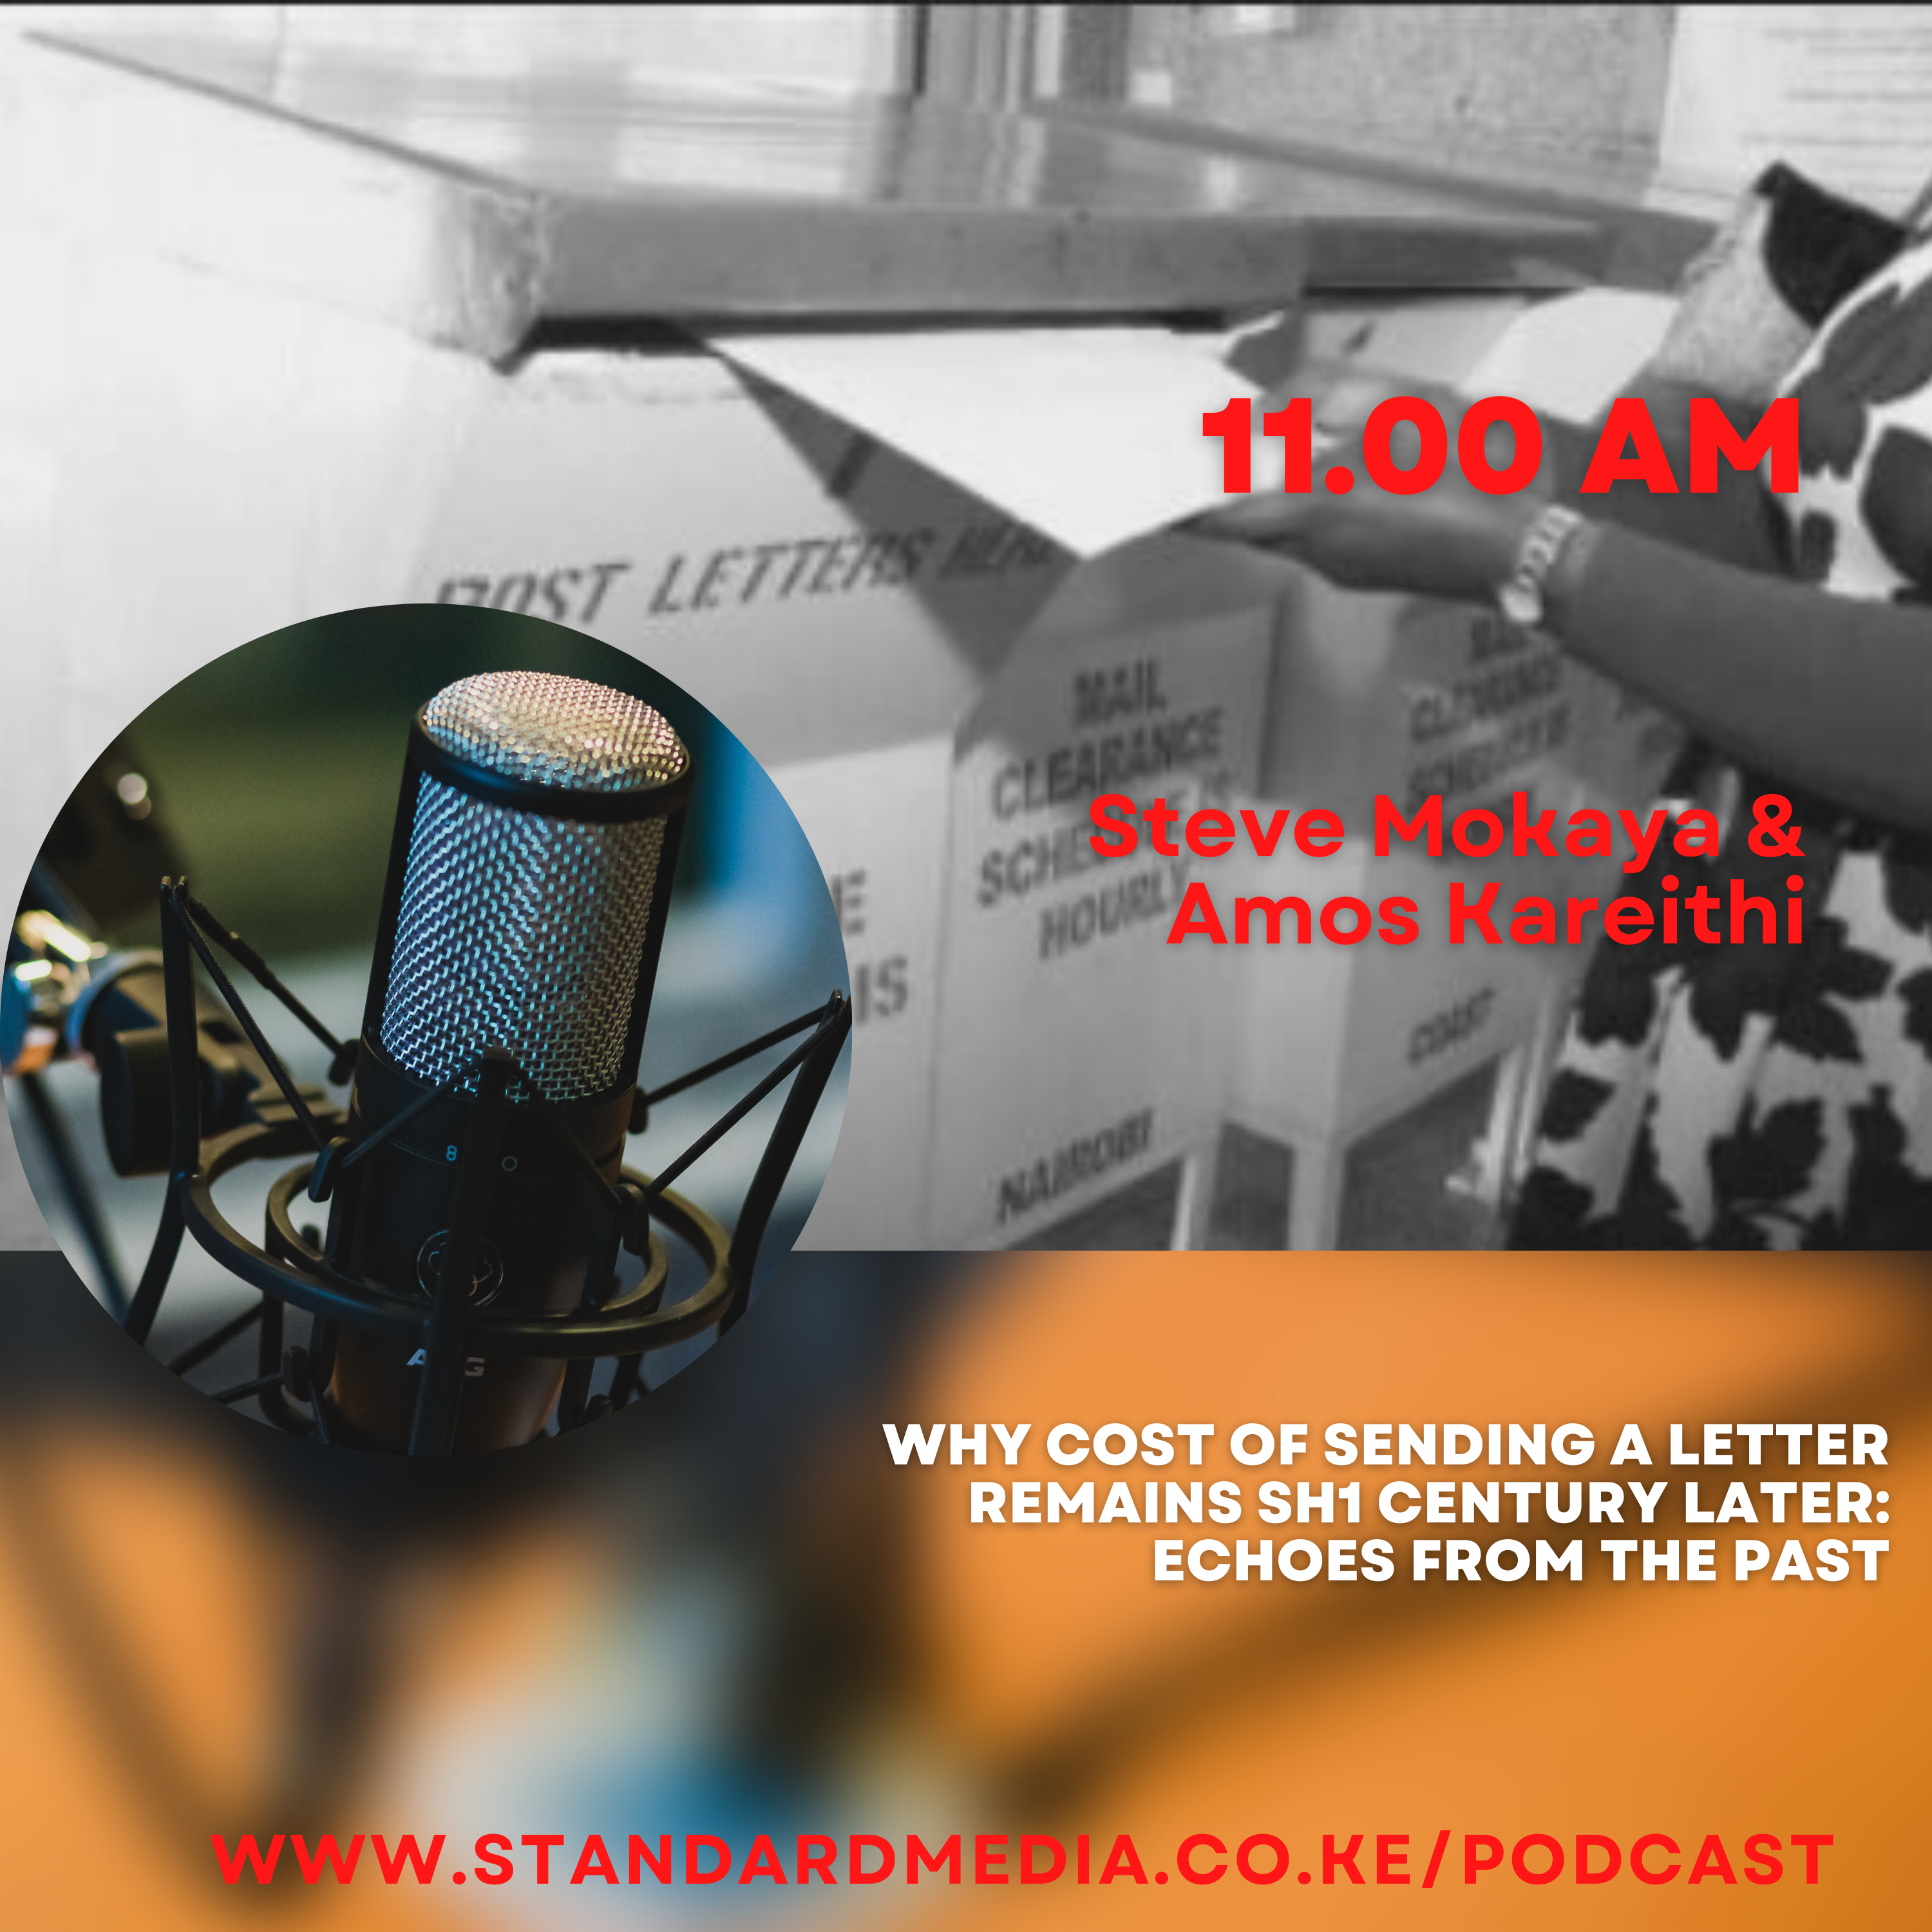 Why the cost of sending a a letter remains Ksh 1 a century later: Echoes From the Past podcast